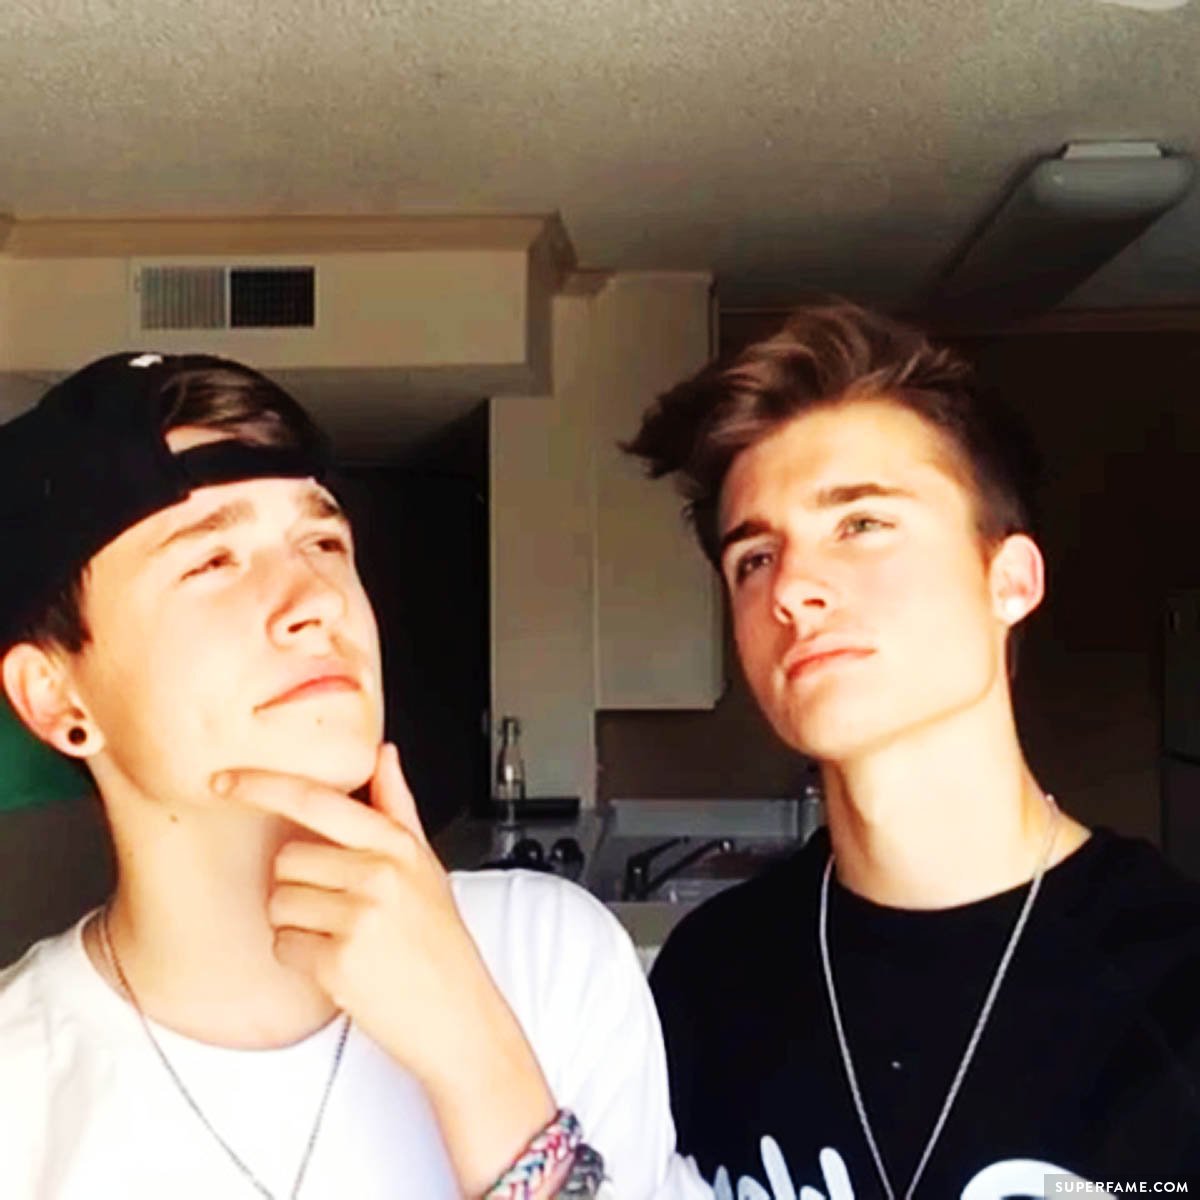 Chris Collins and Crawford Collins.